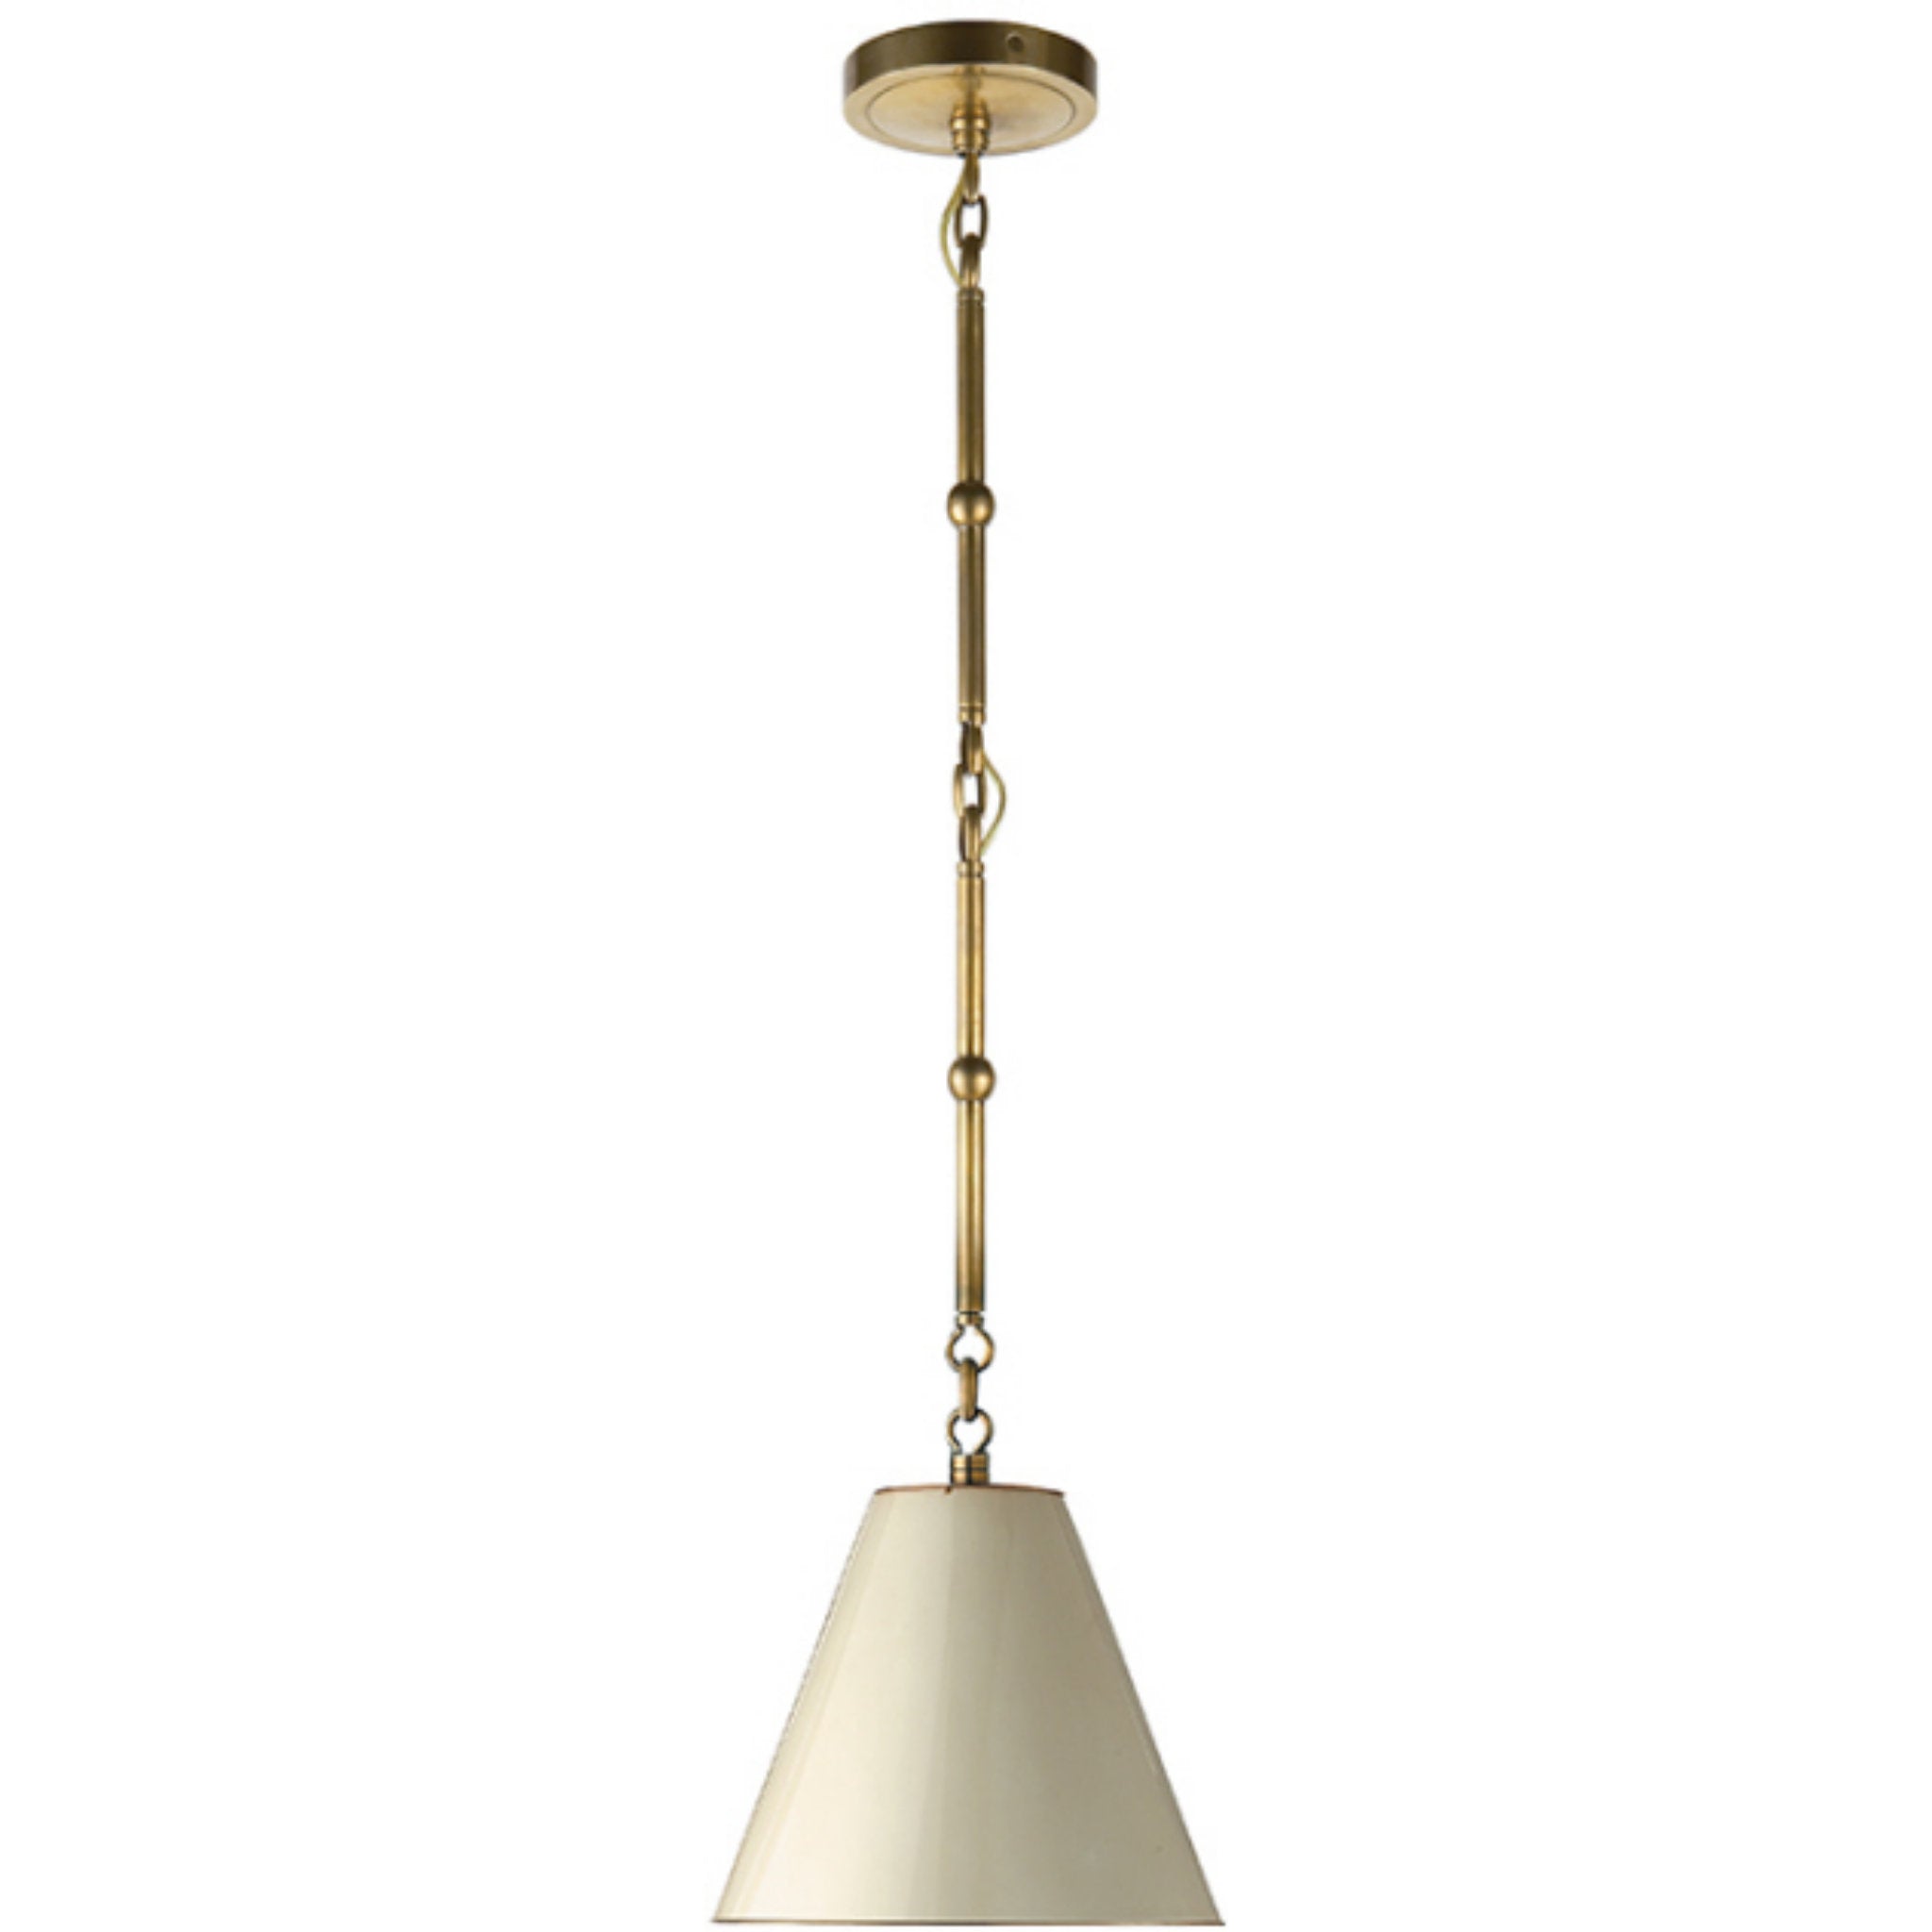 Thomas O'Brien Goodman Petite Hanging Shade in Hand-Rubbed Antique Brass with Antique White Shade